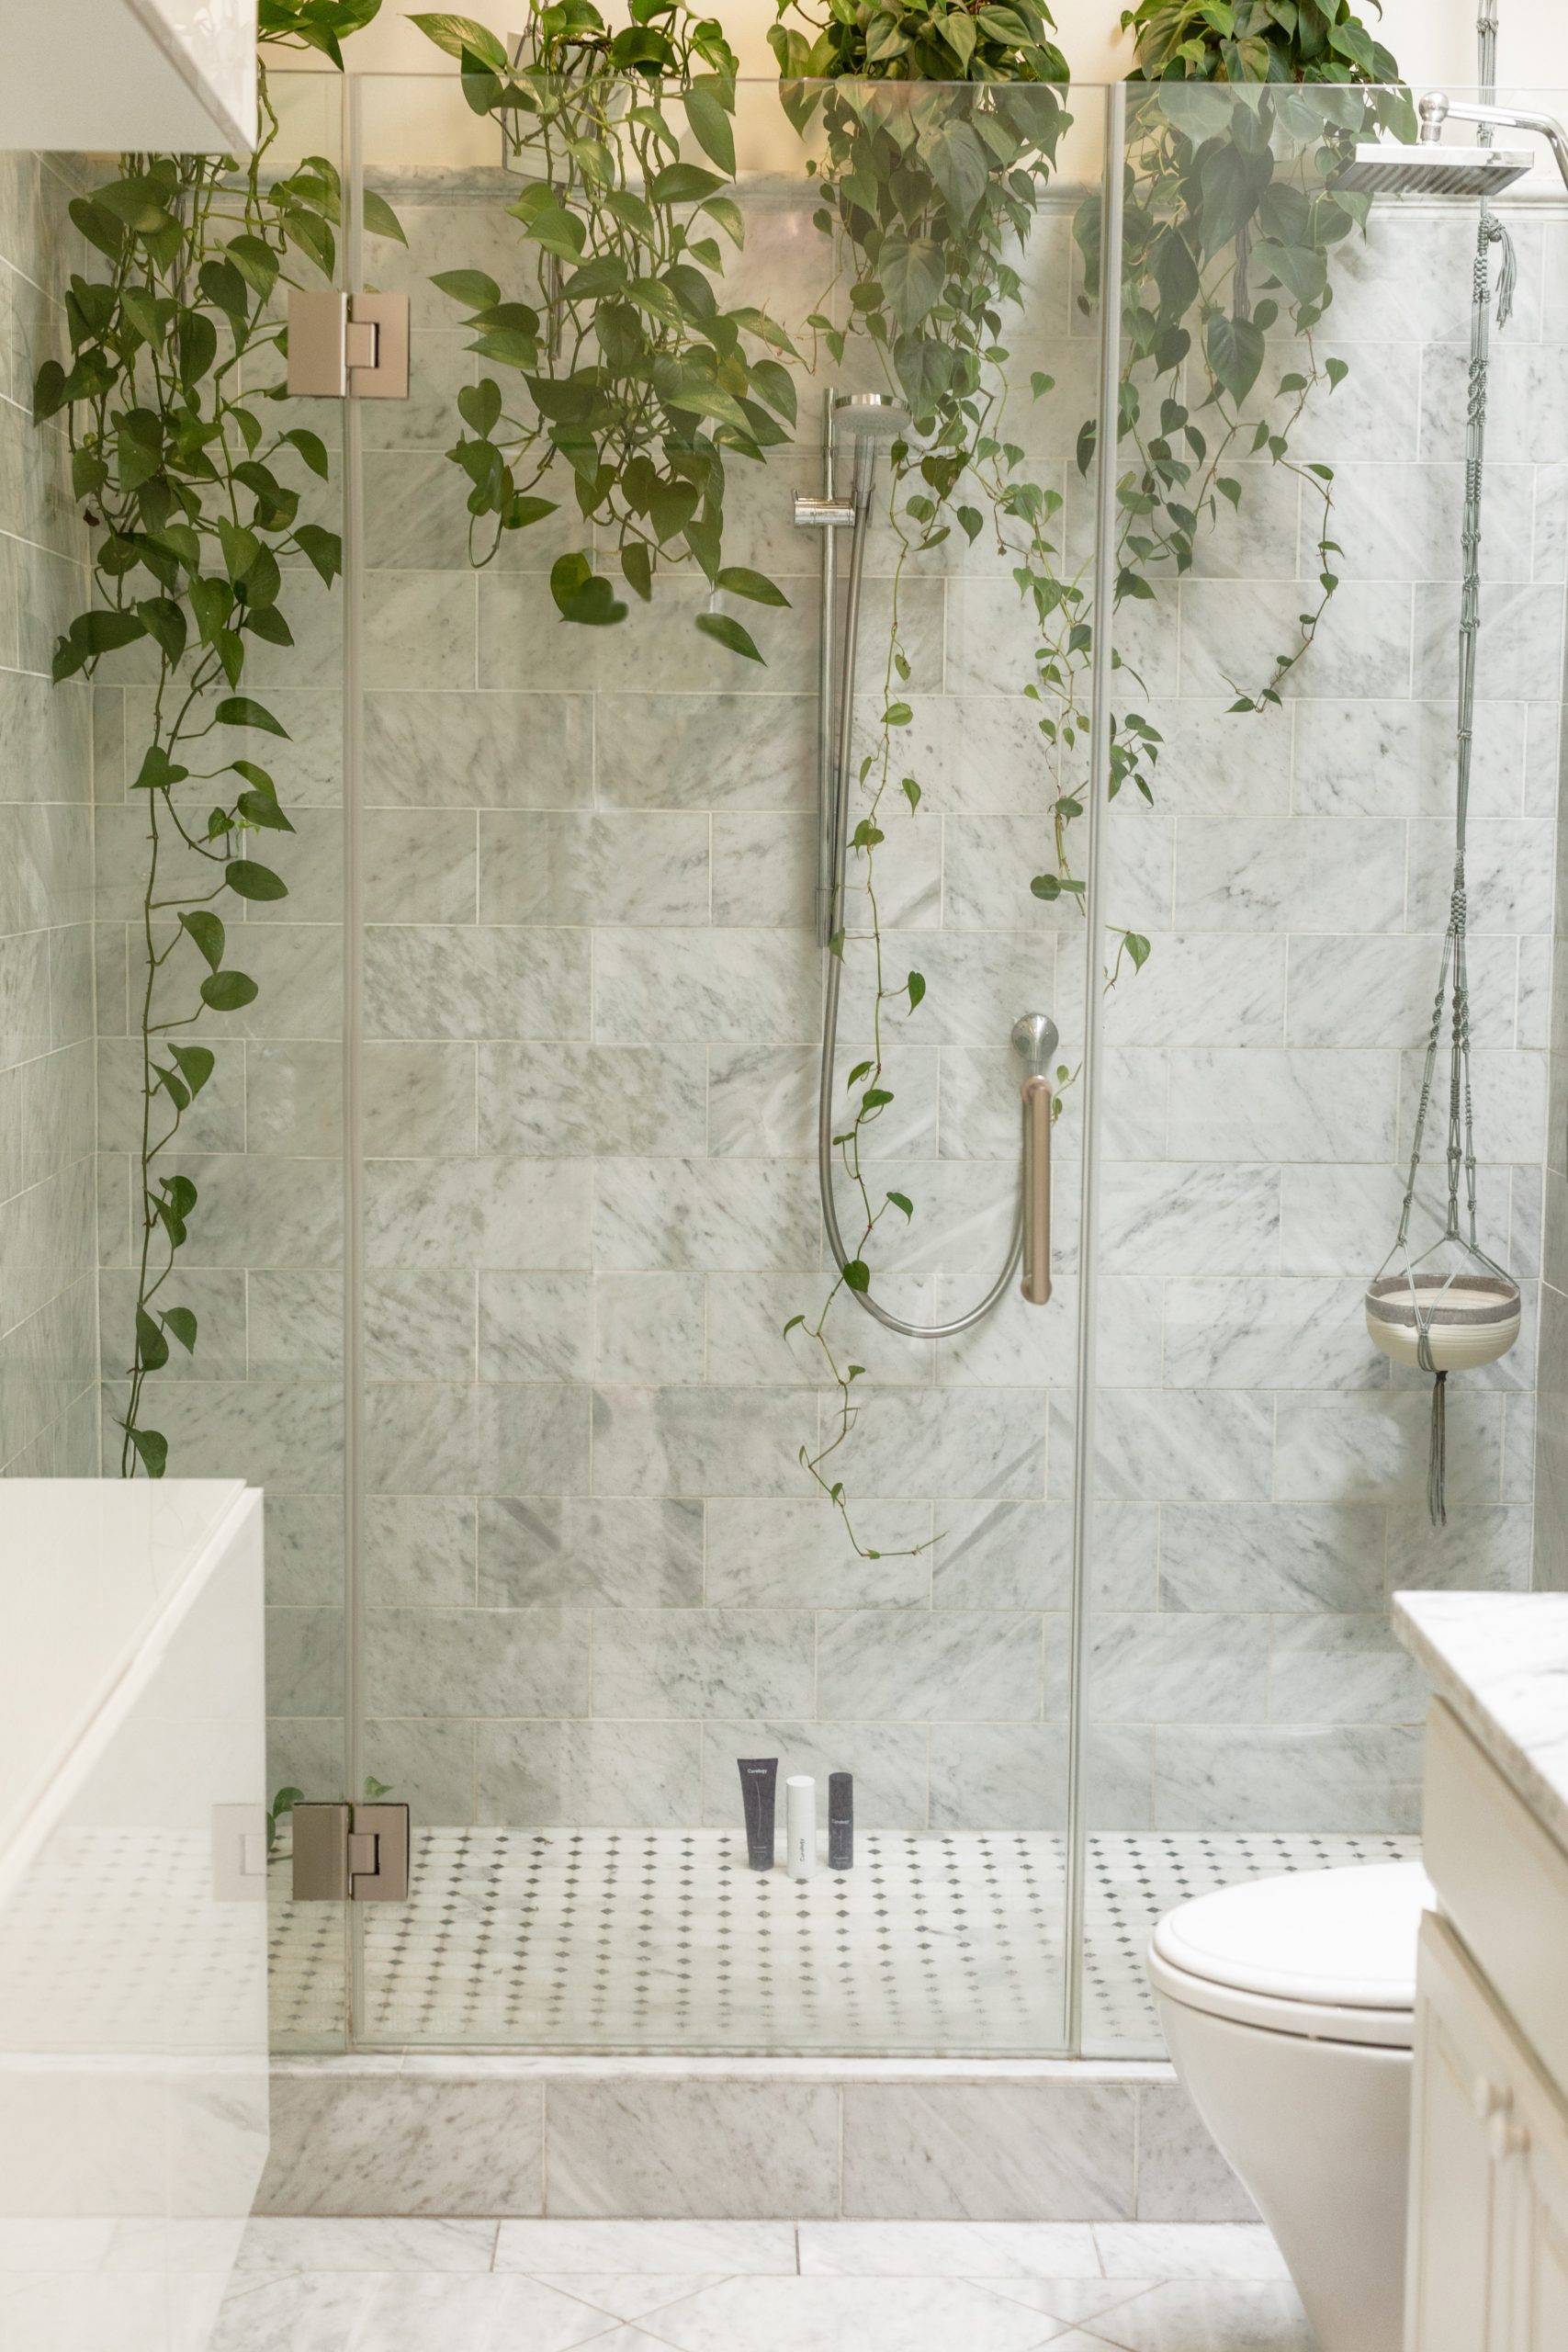 Vine in the shower for a whimsical touch (from Unsplash)